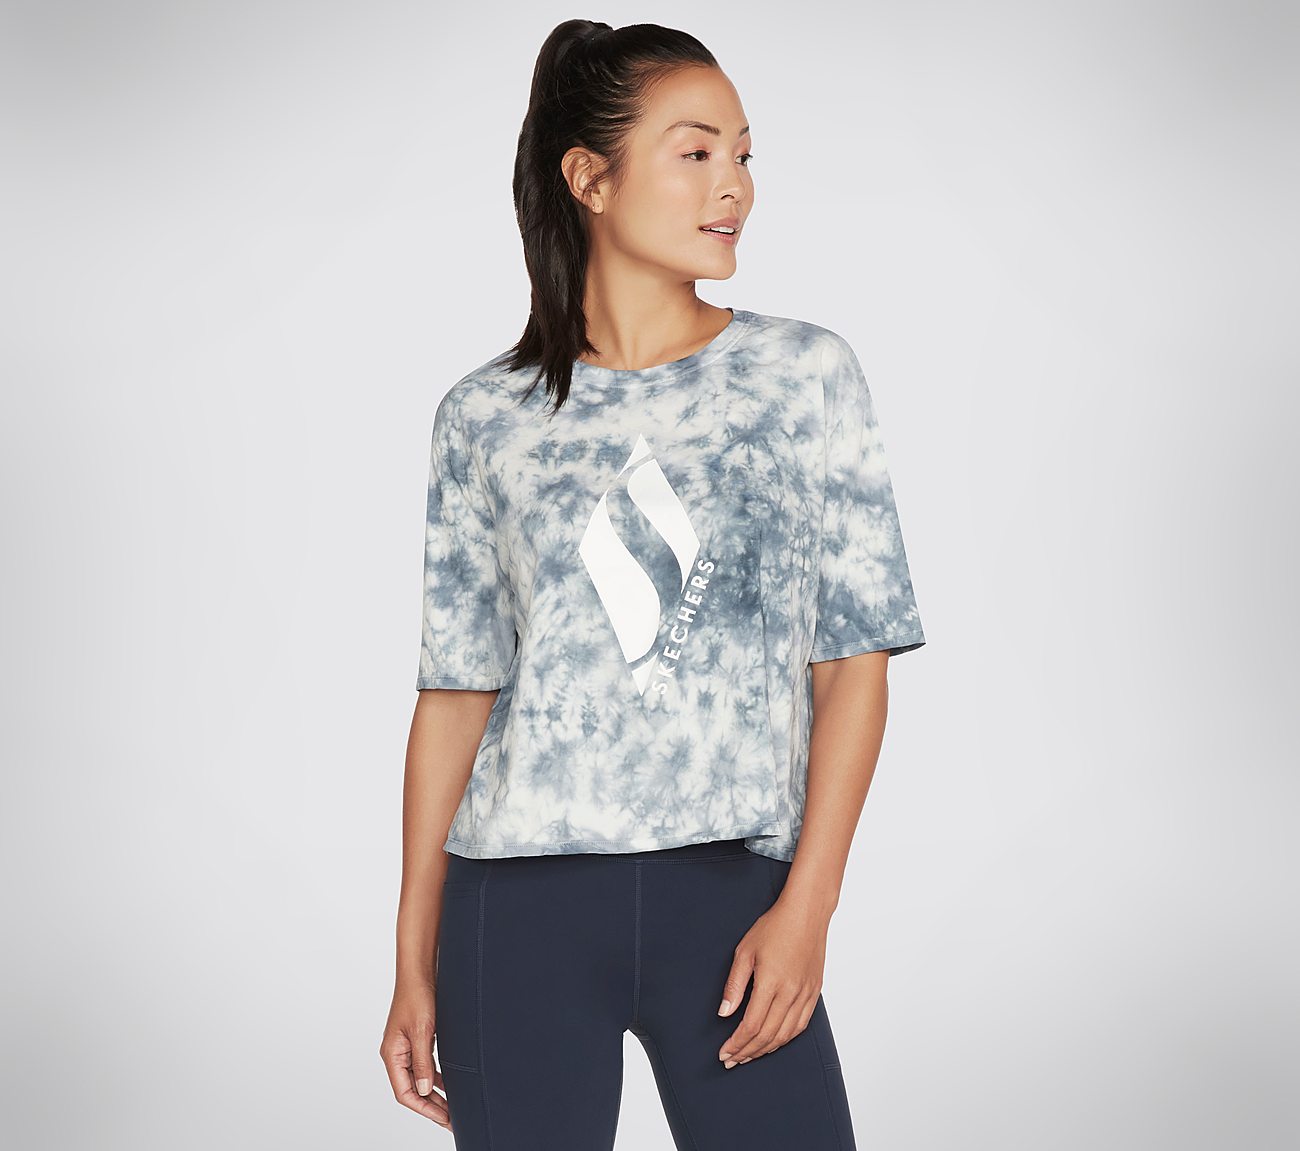 SKECHDYE VIBE CROP TEE, CCHARCOAL Apparel Lateral View